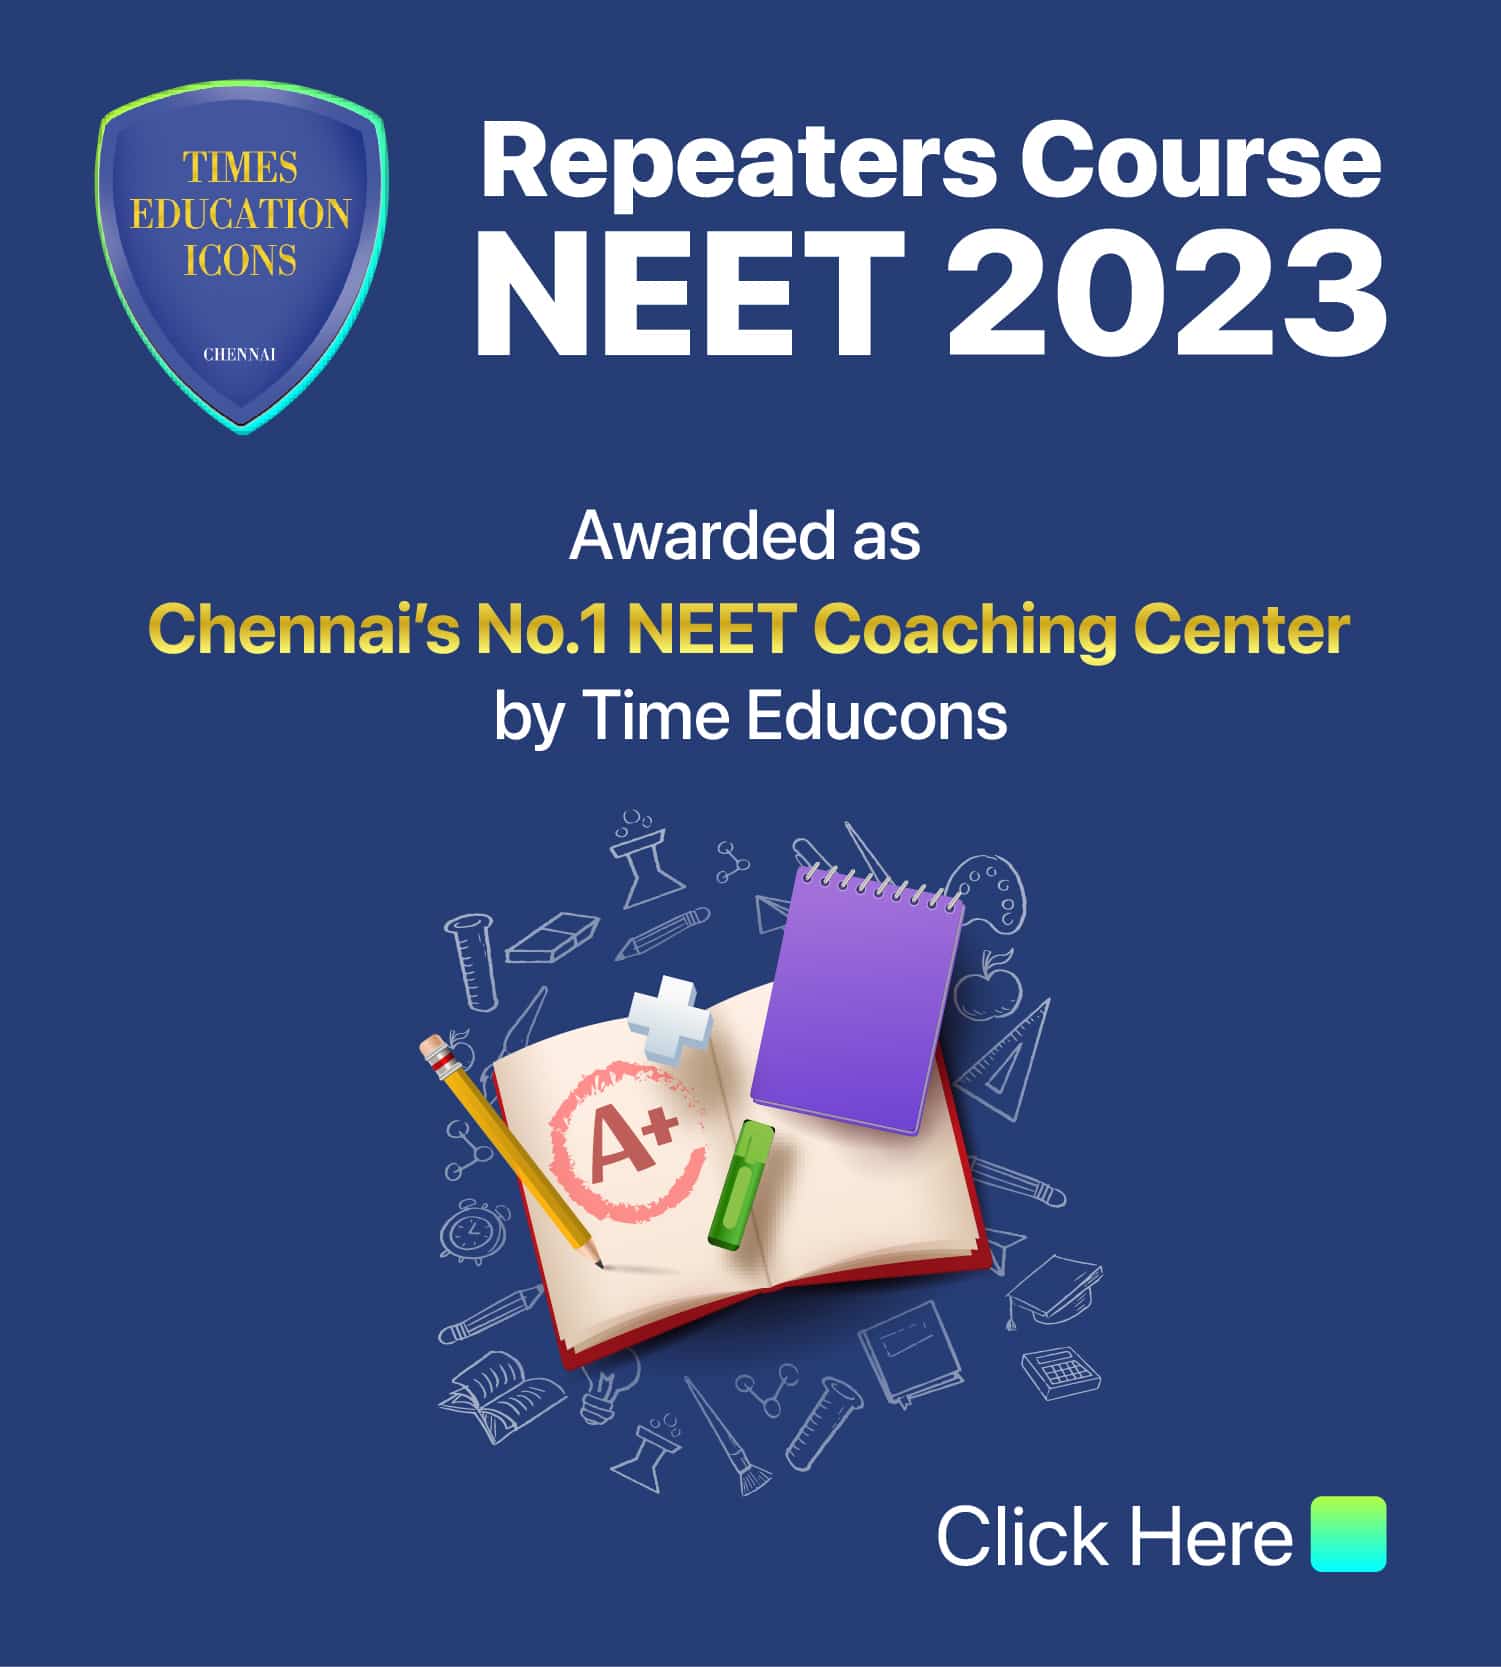 vvt-repeaters-course-2023-mobile